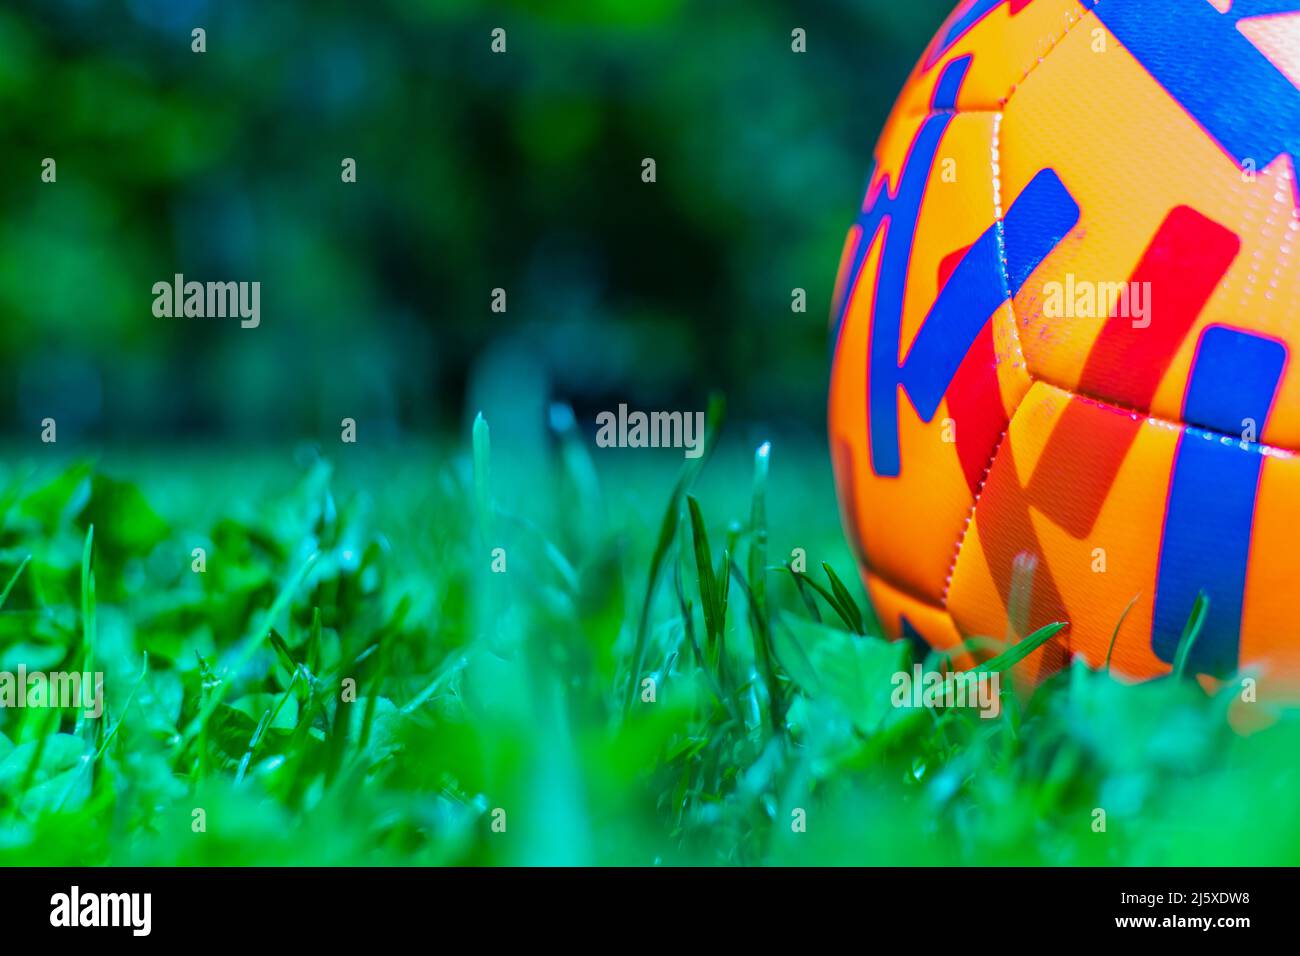 Colorful Football on grass Qatar World Cup 2022 Concept close-up Stock Photo